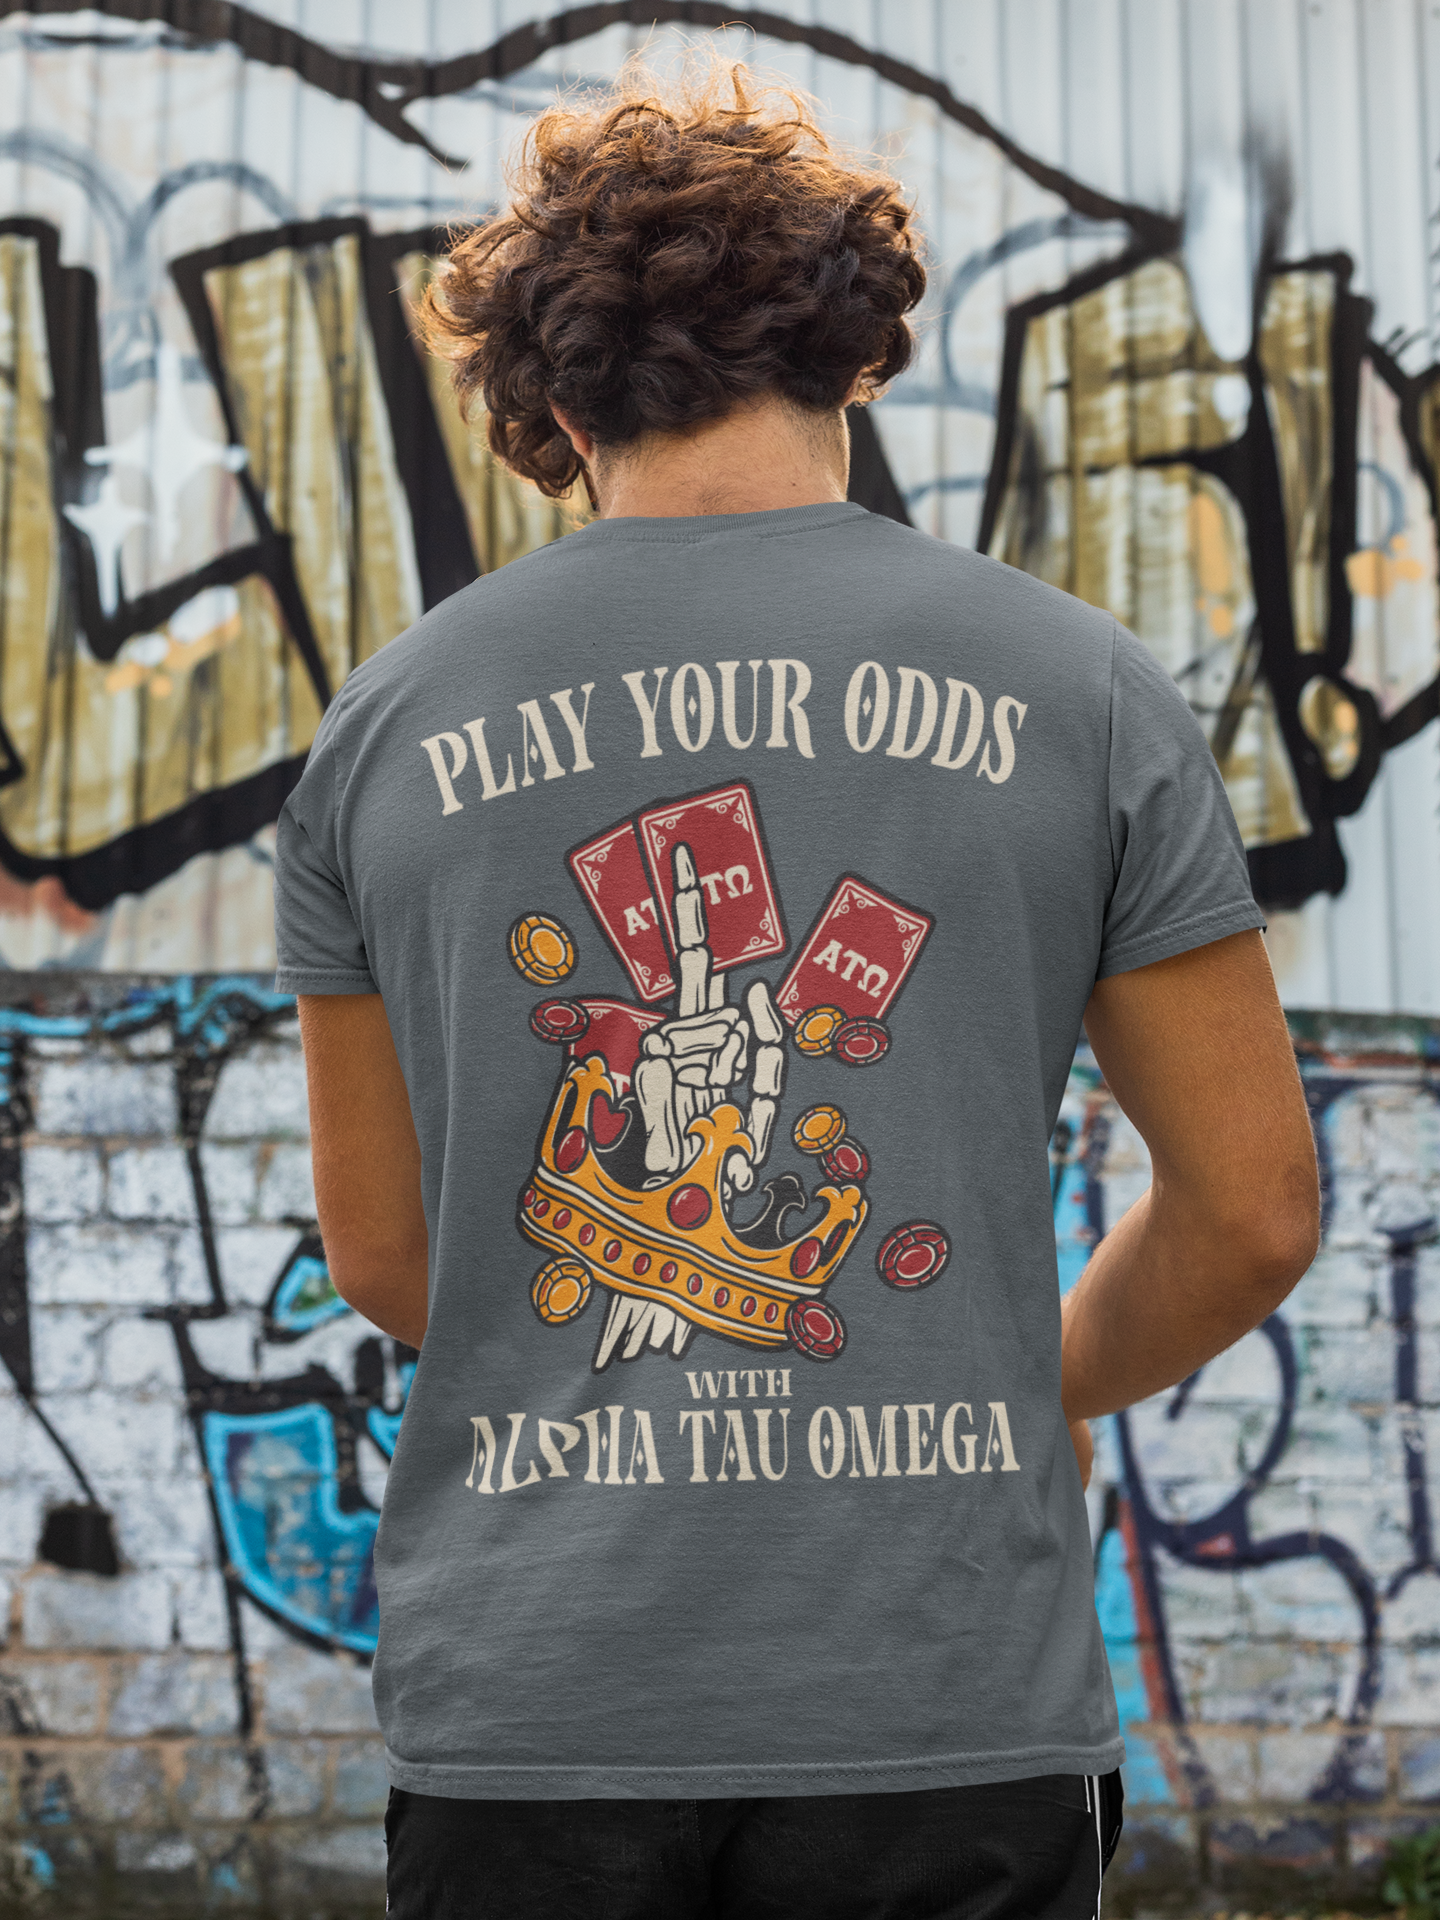 Grey Alpha Tau Omega Graphic T-Shirt | Play Your Odds | Fraternity Merchandise back model 